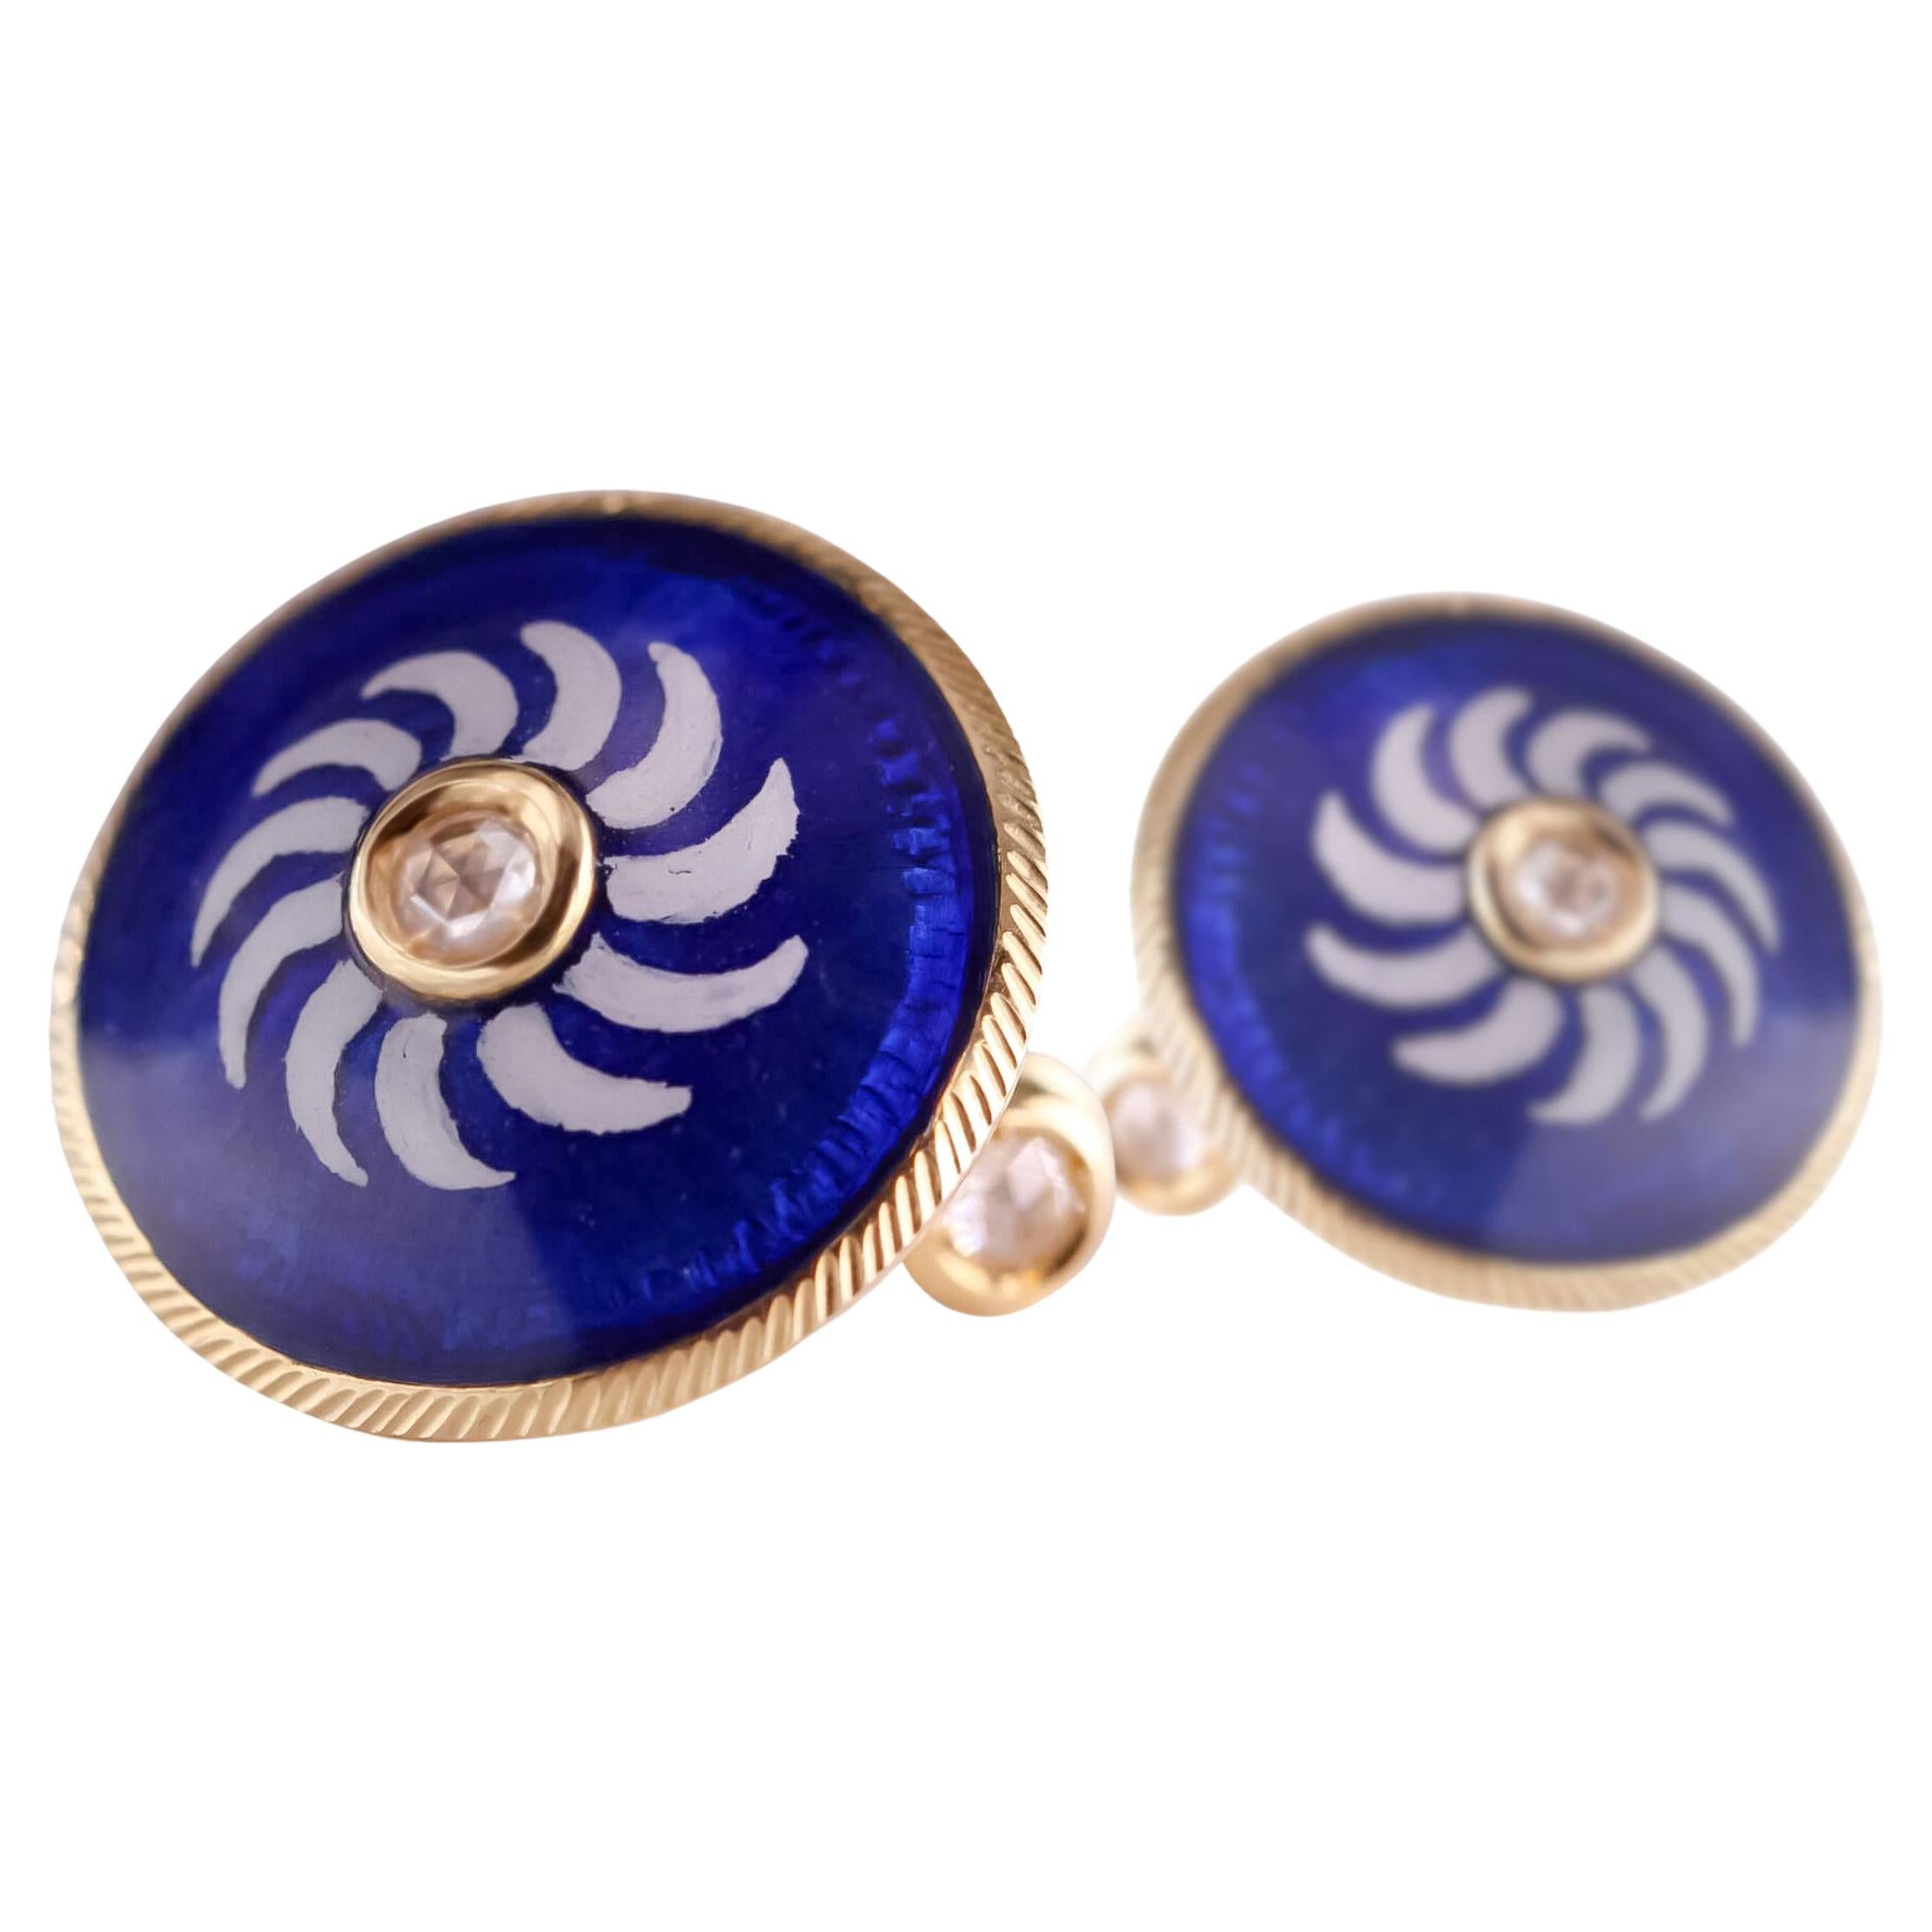 18kt Yellow Gold Cufflinks with Royal Blue Enamel and Rose-Cut Diamonds